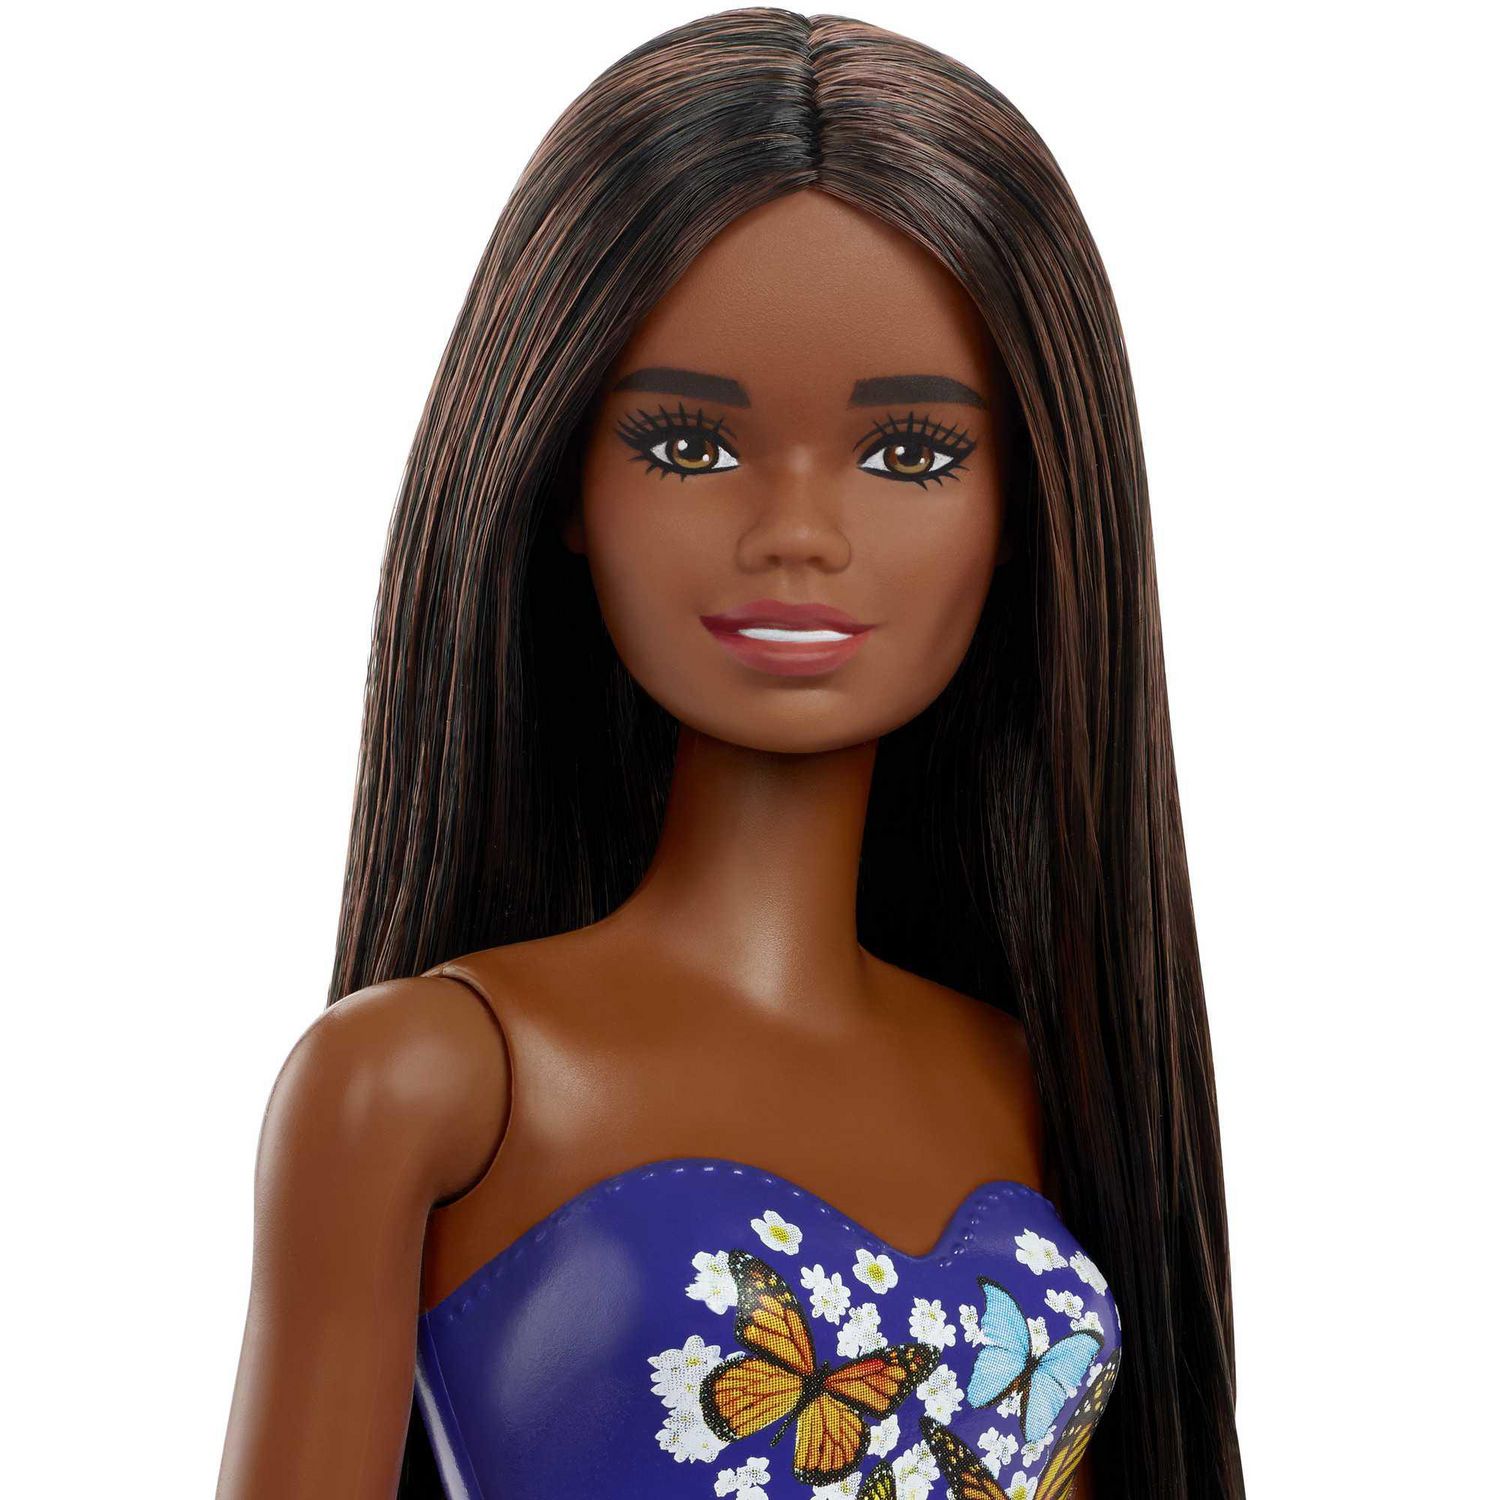 Barbie Dolls Wearing Swimsuits (Sustainable Materials) - Butterflies &  Baby's Breath, for Kids 3 to 7 Years Old